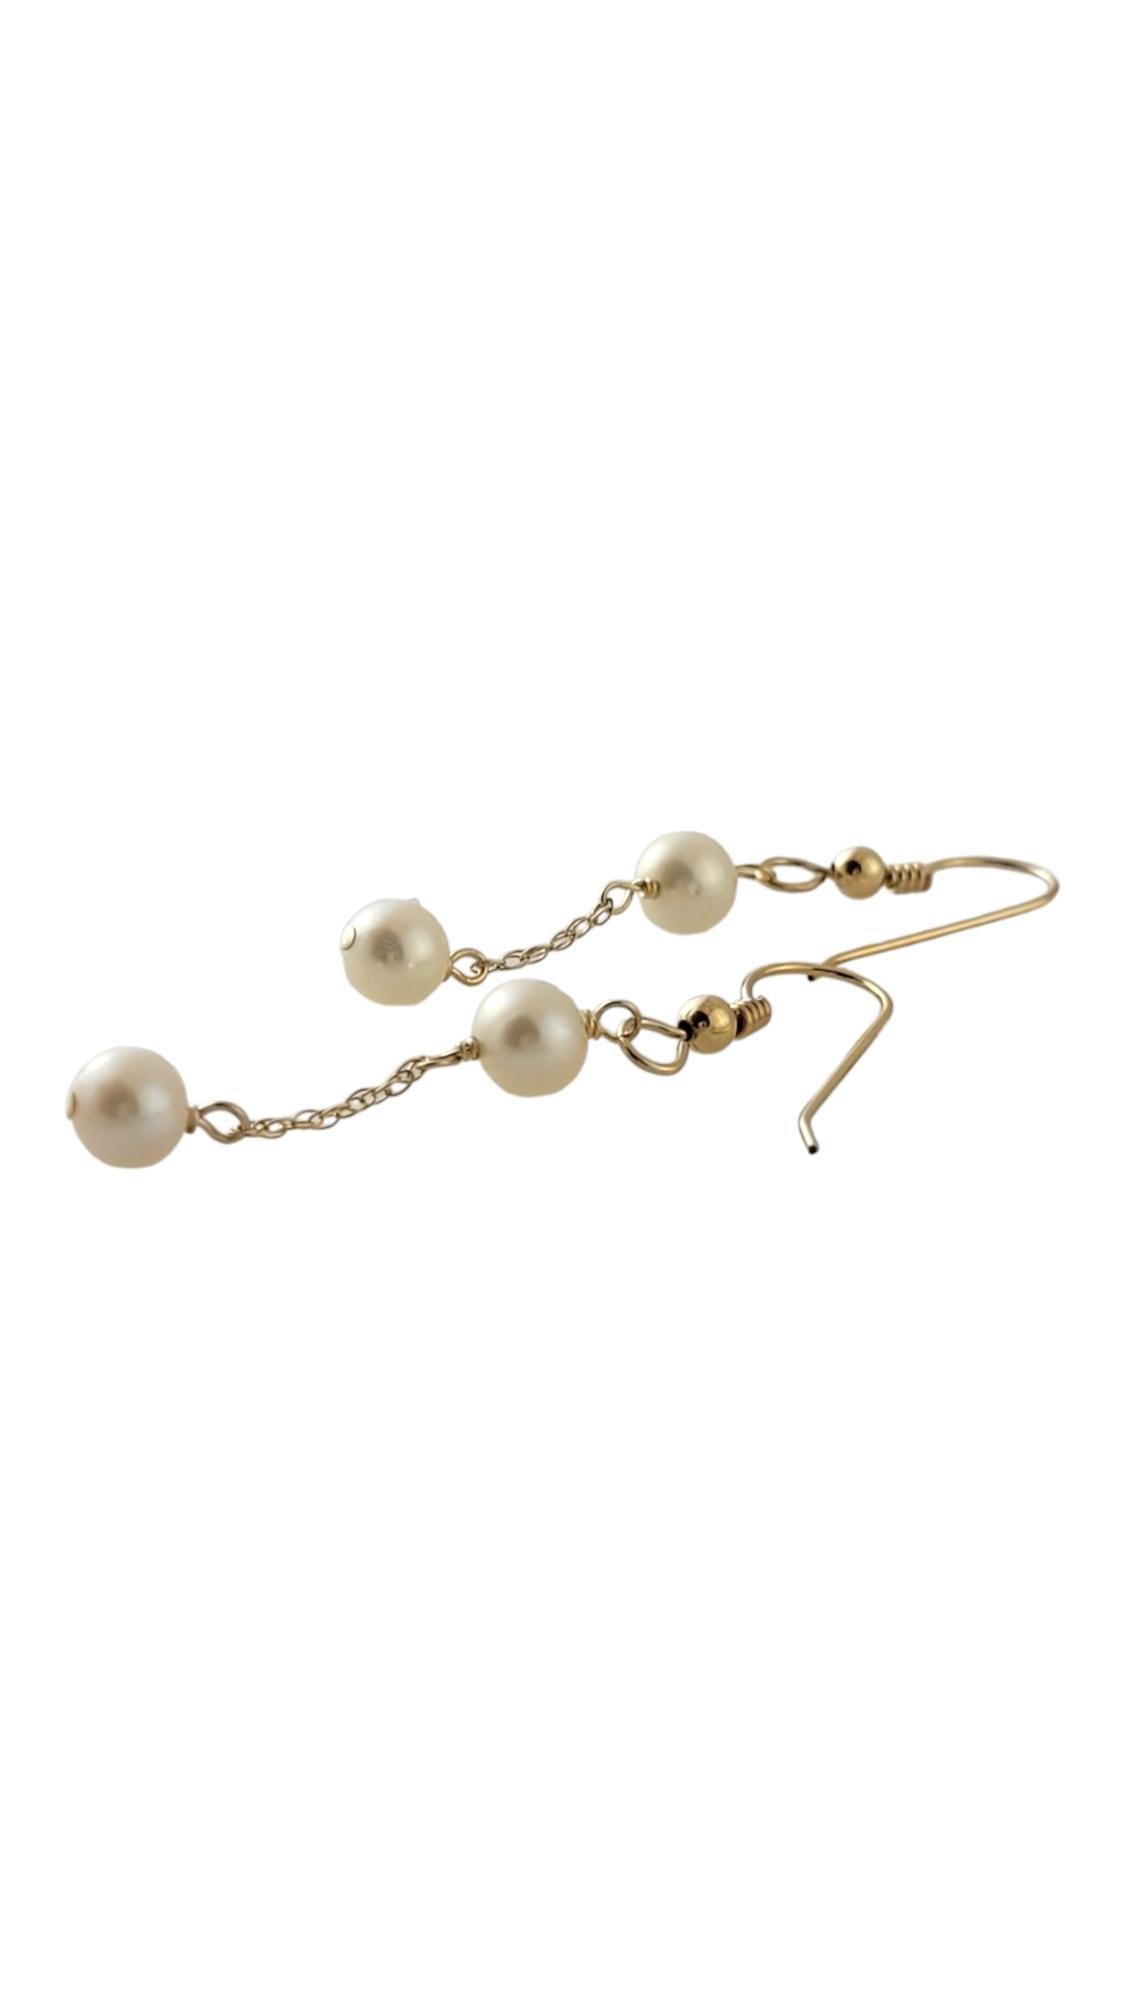 10K Yellow Gold Pearl Dangle Earrings

This gorgeous set of dangle earrings features 4 stunning white pearls!

Pearls: 6.1mm

Size: 45mm X 6 mm X 6 mm

Weight: 1.0 dwt/ 1.7 g

Tested 10K

Very good condition, professionally polished.

Will come